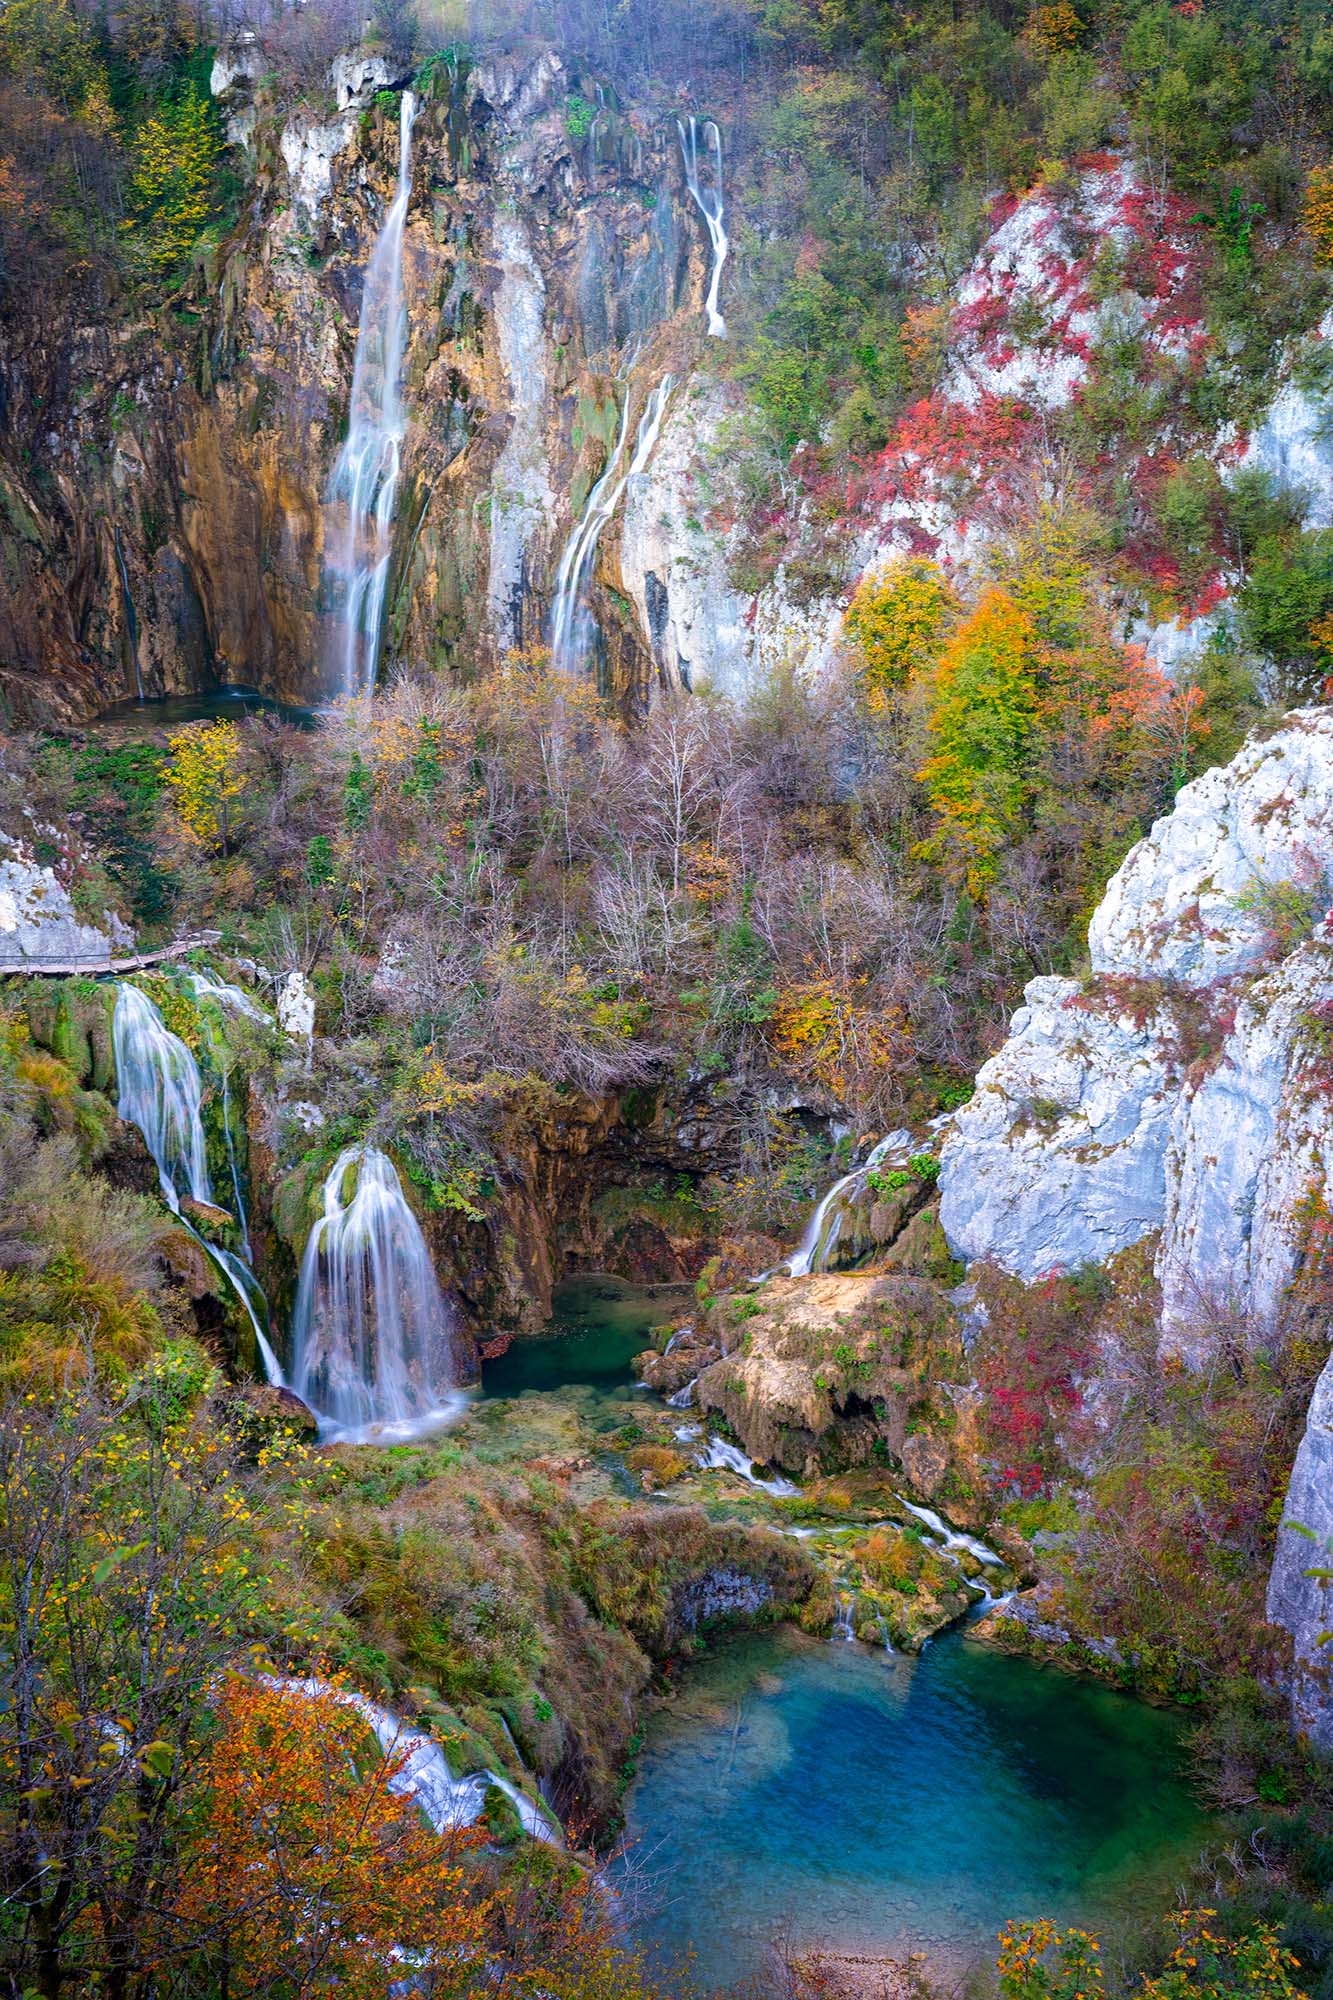 "Autumn's Cascade Canvas" presents a vertical snapshot from the vibrant fall season in Plitvice National Park, Croatia. Nature...